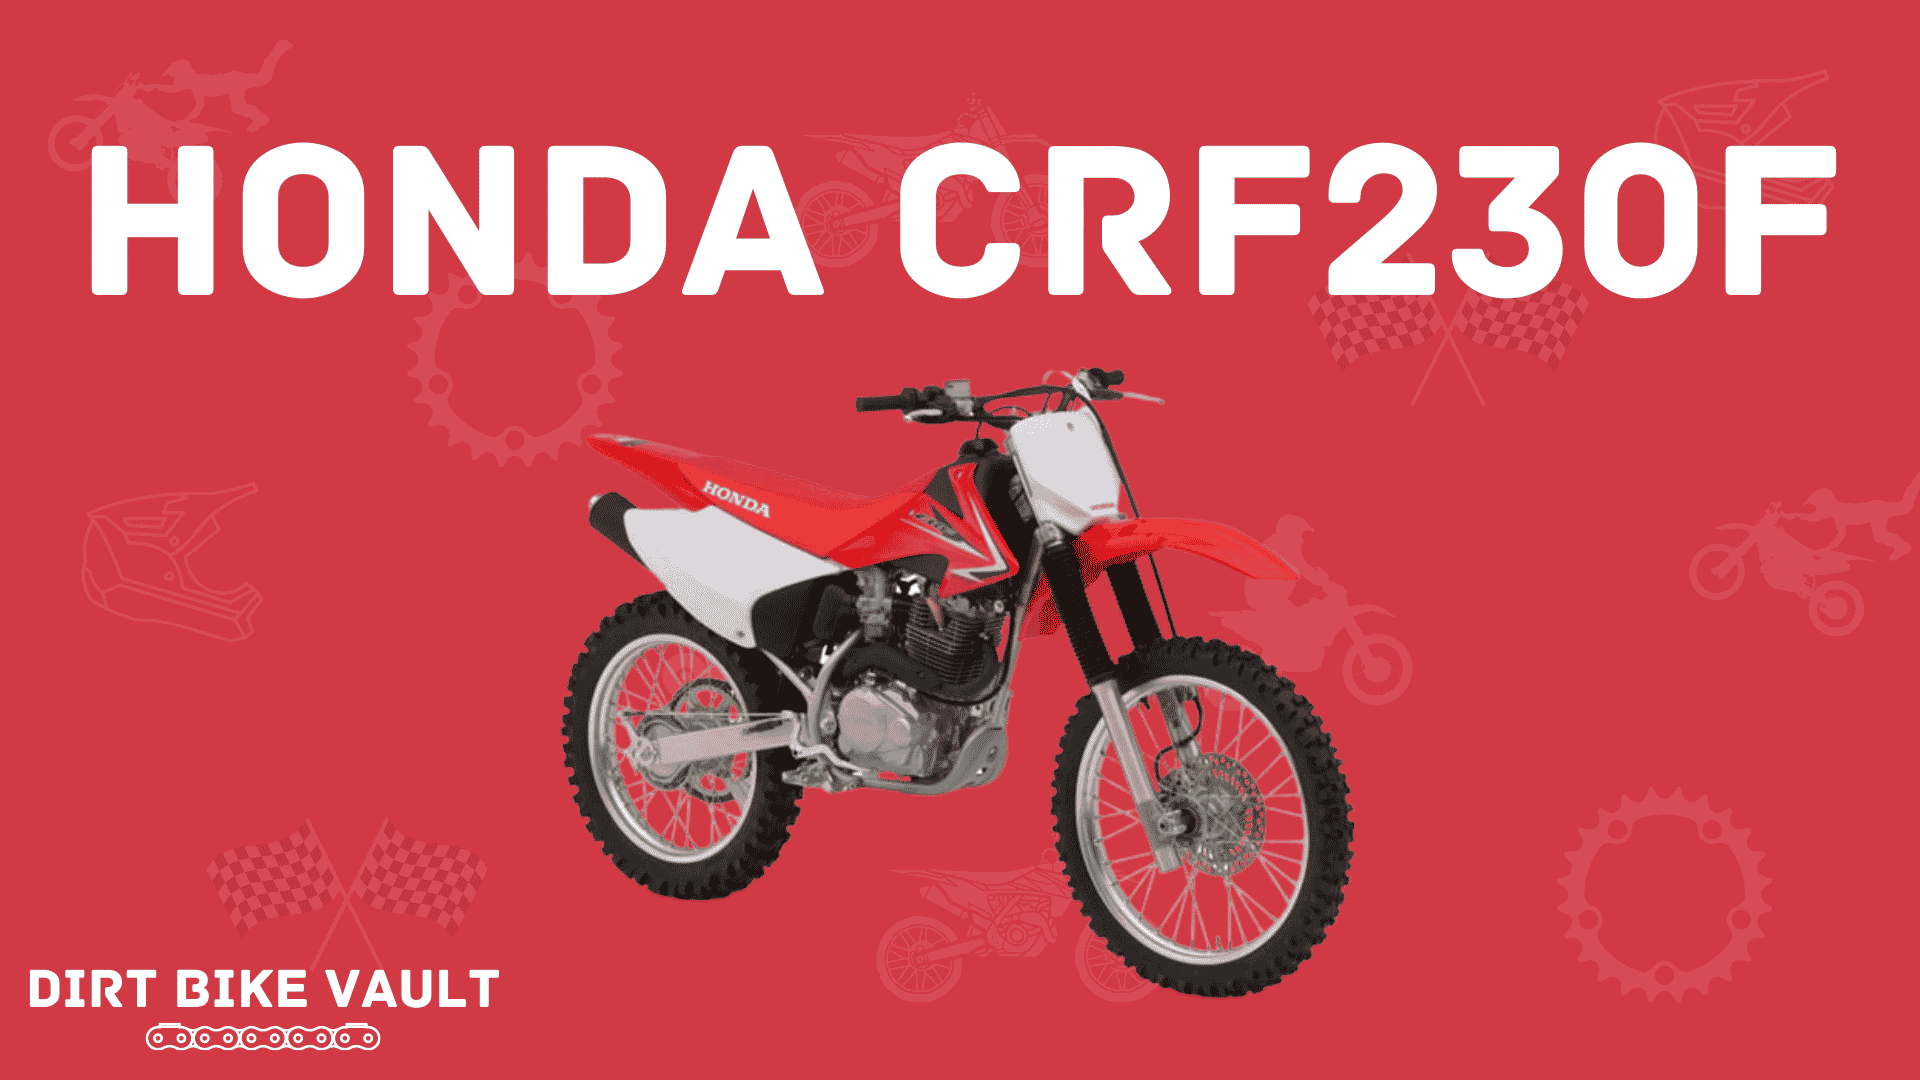 Honda CRF230F in white text on red background with image of CRF230 bike